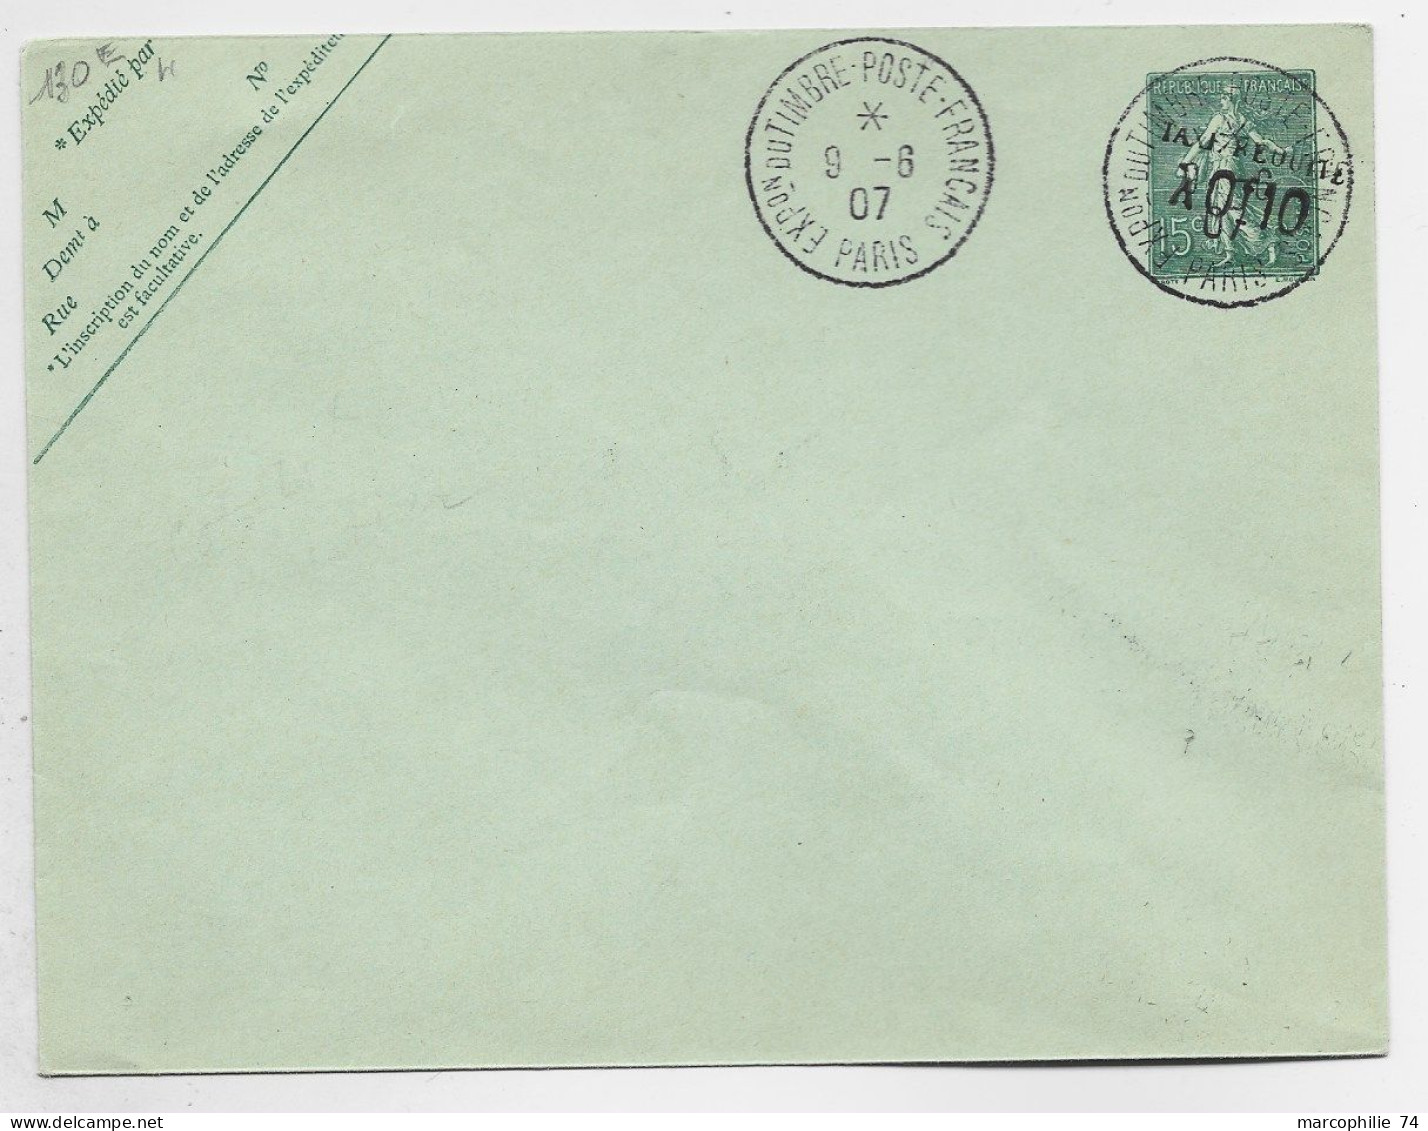 FRANCE ENTIER 15C LIGNEE TAXE REDUITE 0FR10 ENVELOPPE EXPon TIMBRE POSTE FRANCAIS 9.6.07 PARIS NEUF SUPERBE  COTE 60€ - Standard Covers & Stamped On Demand (before 1995)